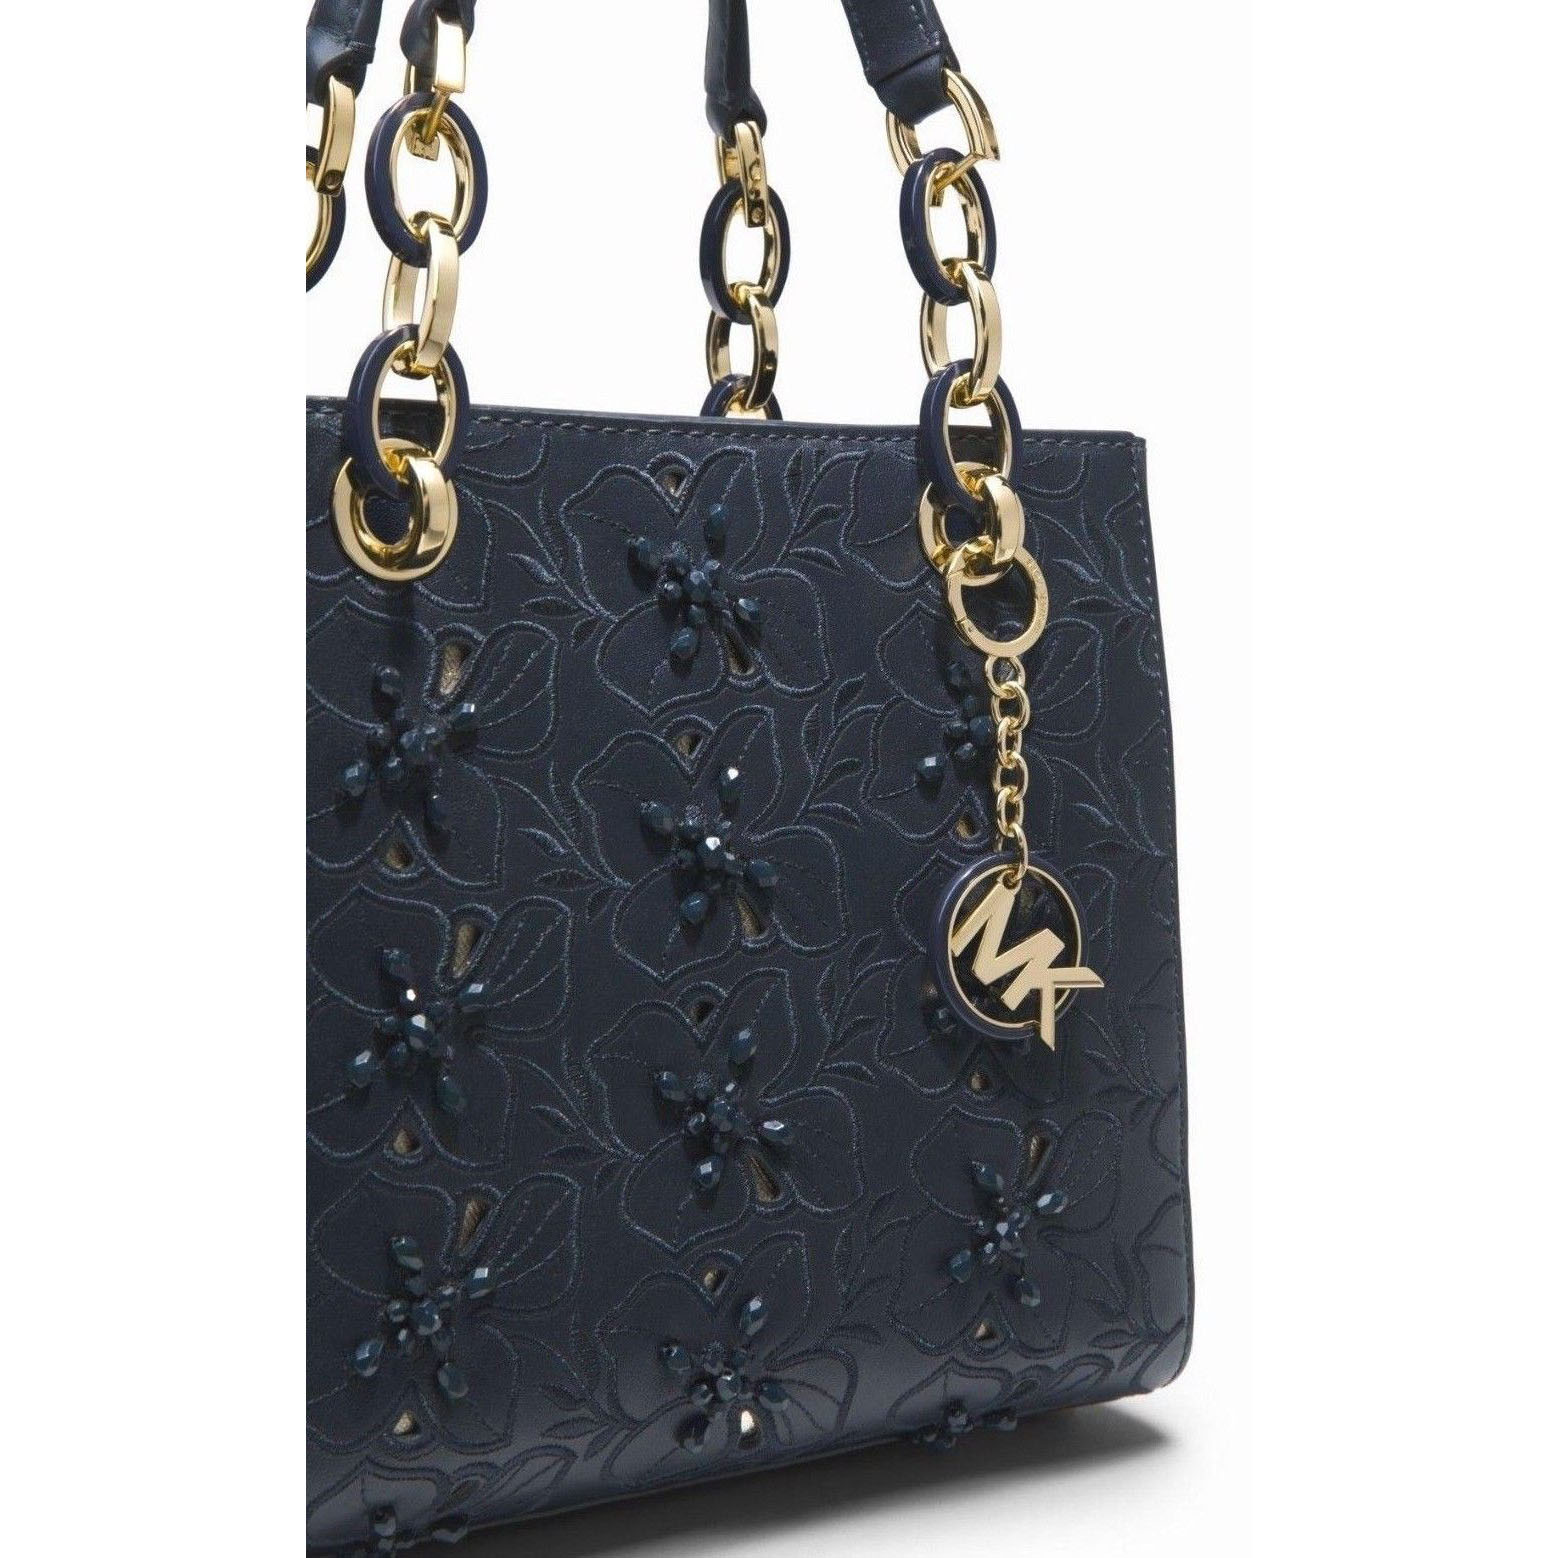 Michael Kors Crossbody Bag Cynthia Small Floral Embroidered Leather Satchel Admiral Navy Dark Blue # 30T8GCYS1I